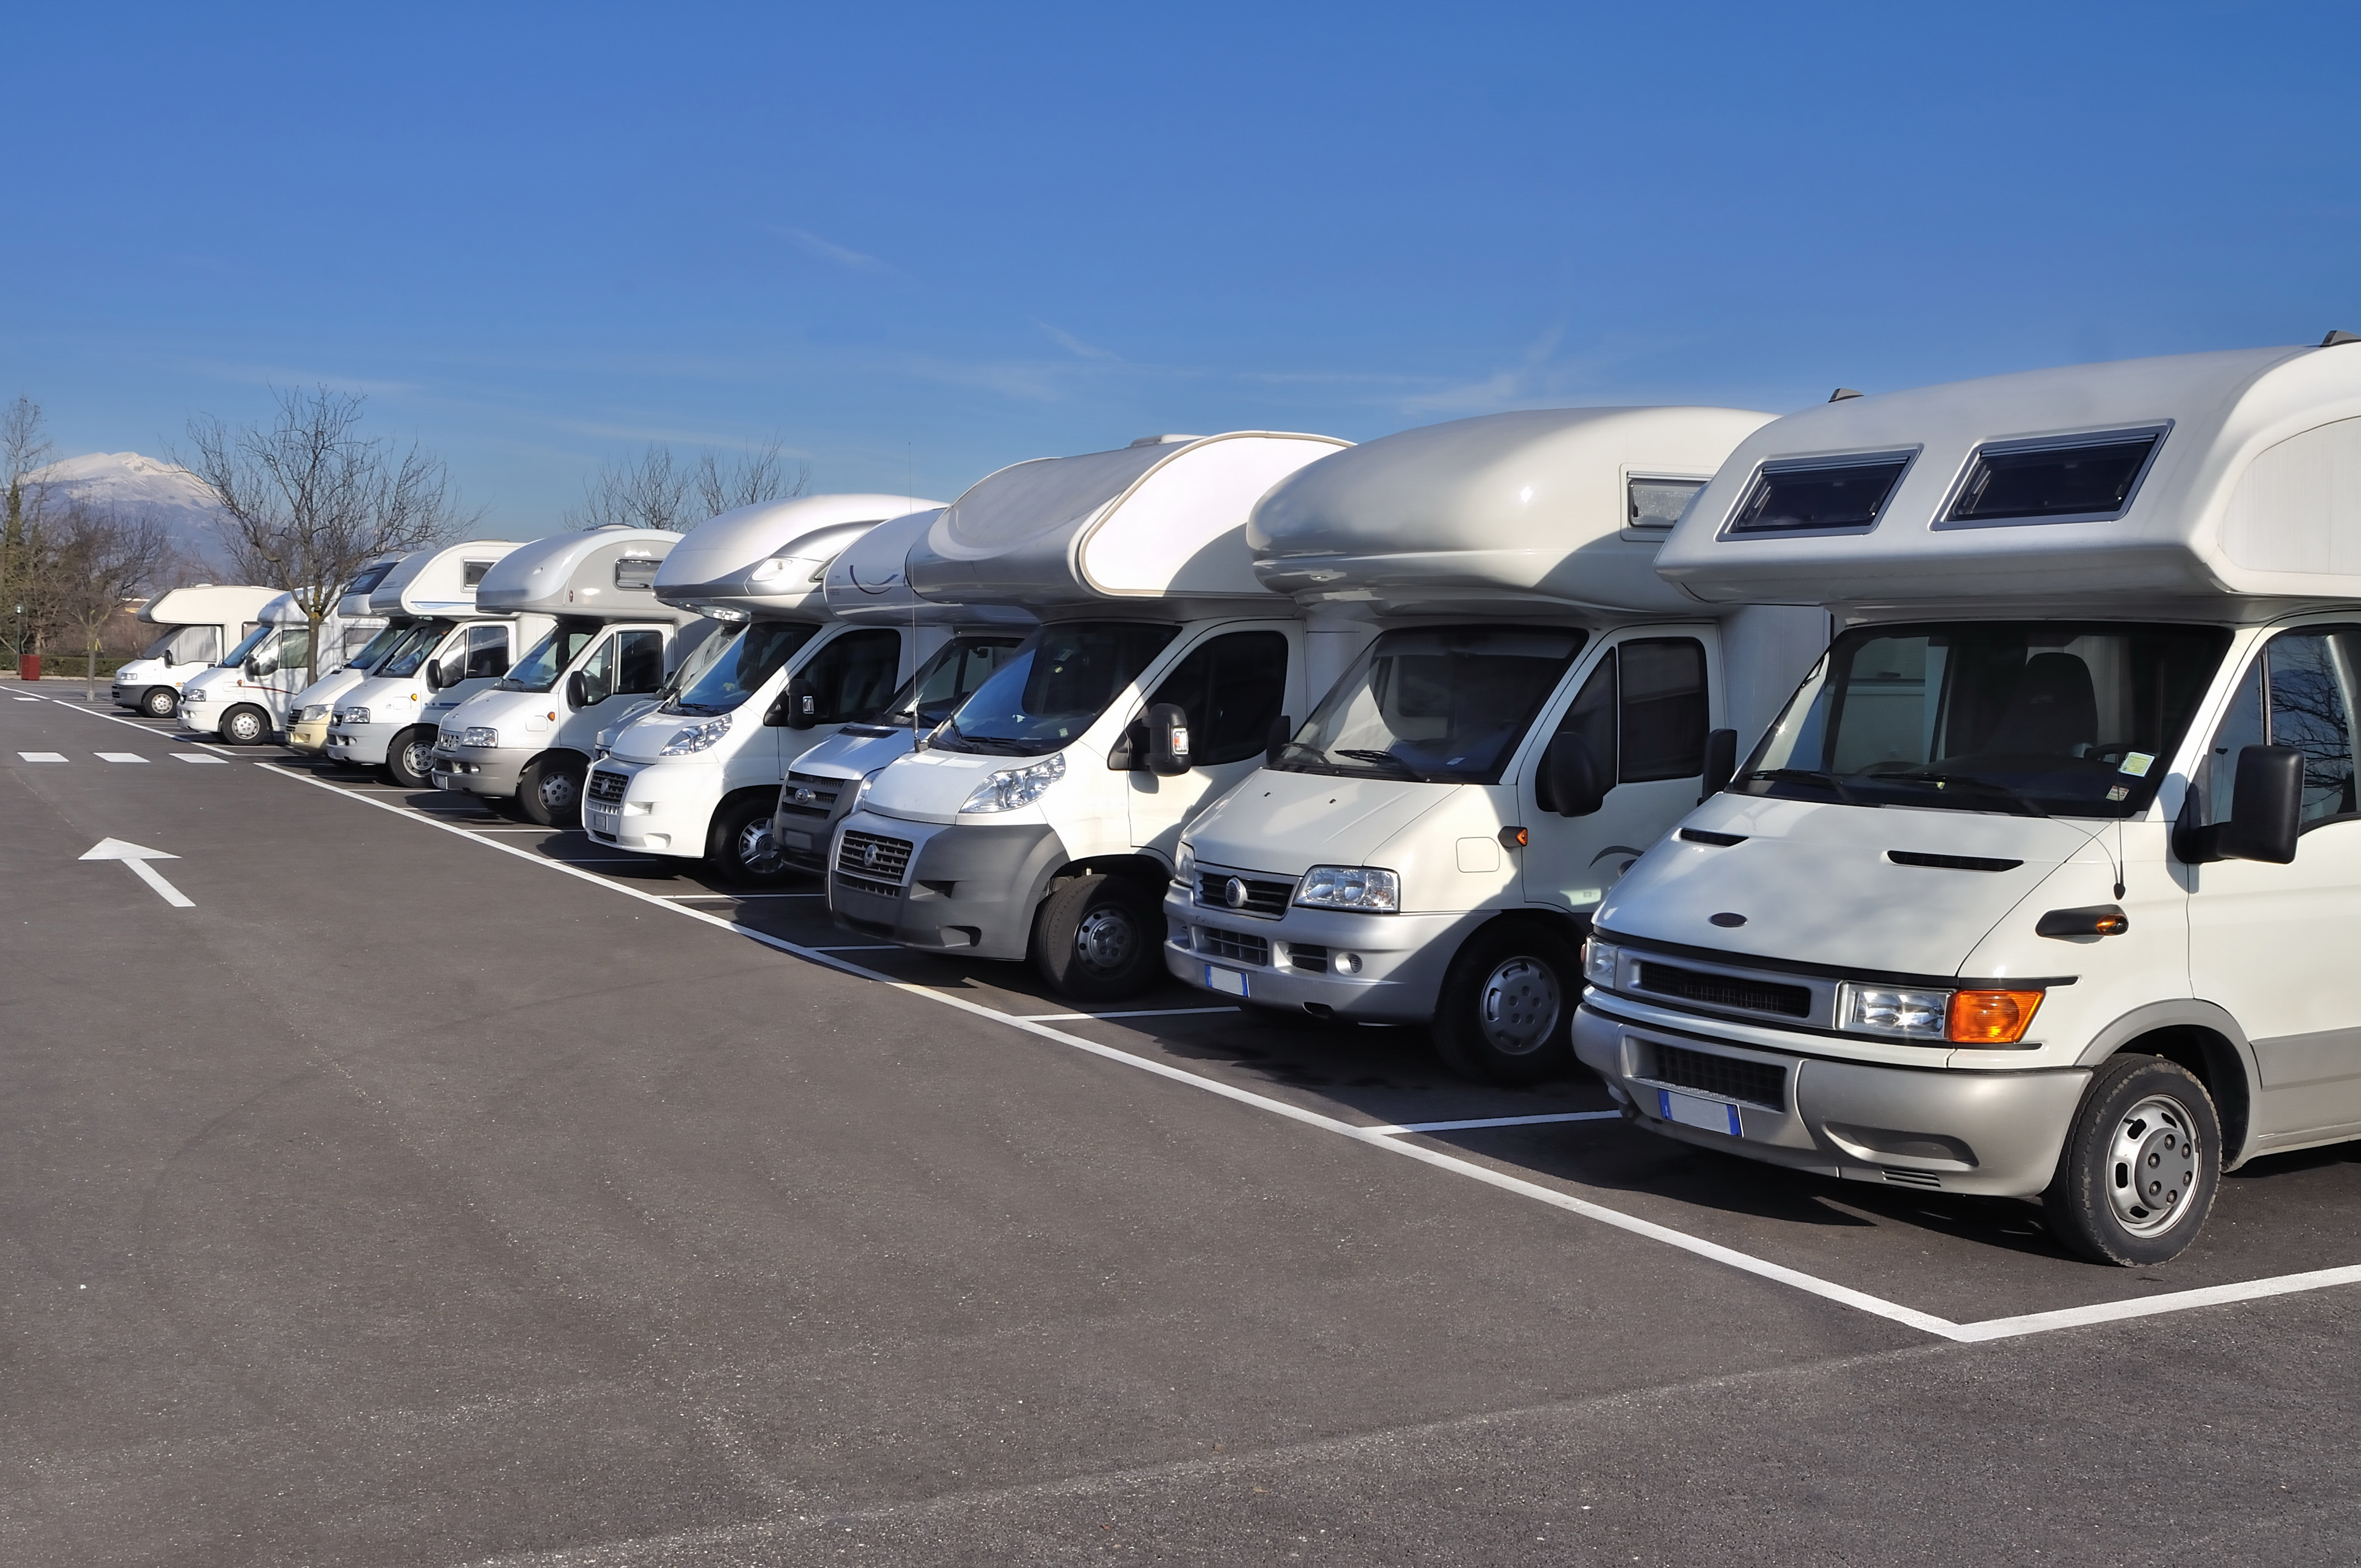 A row of recreational vehicles in parking spaces